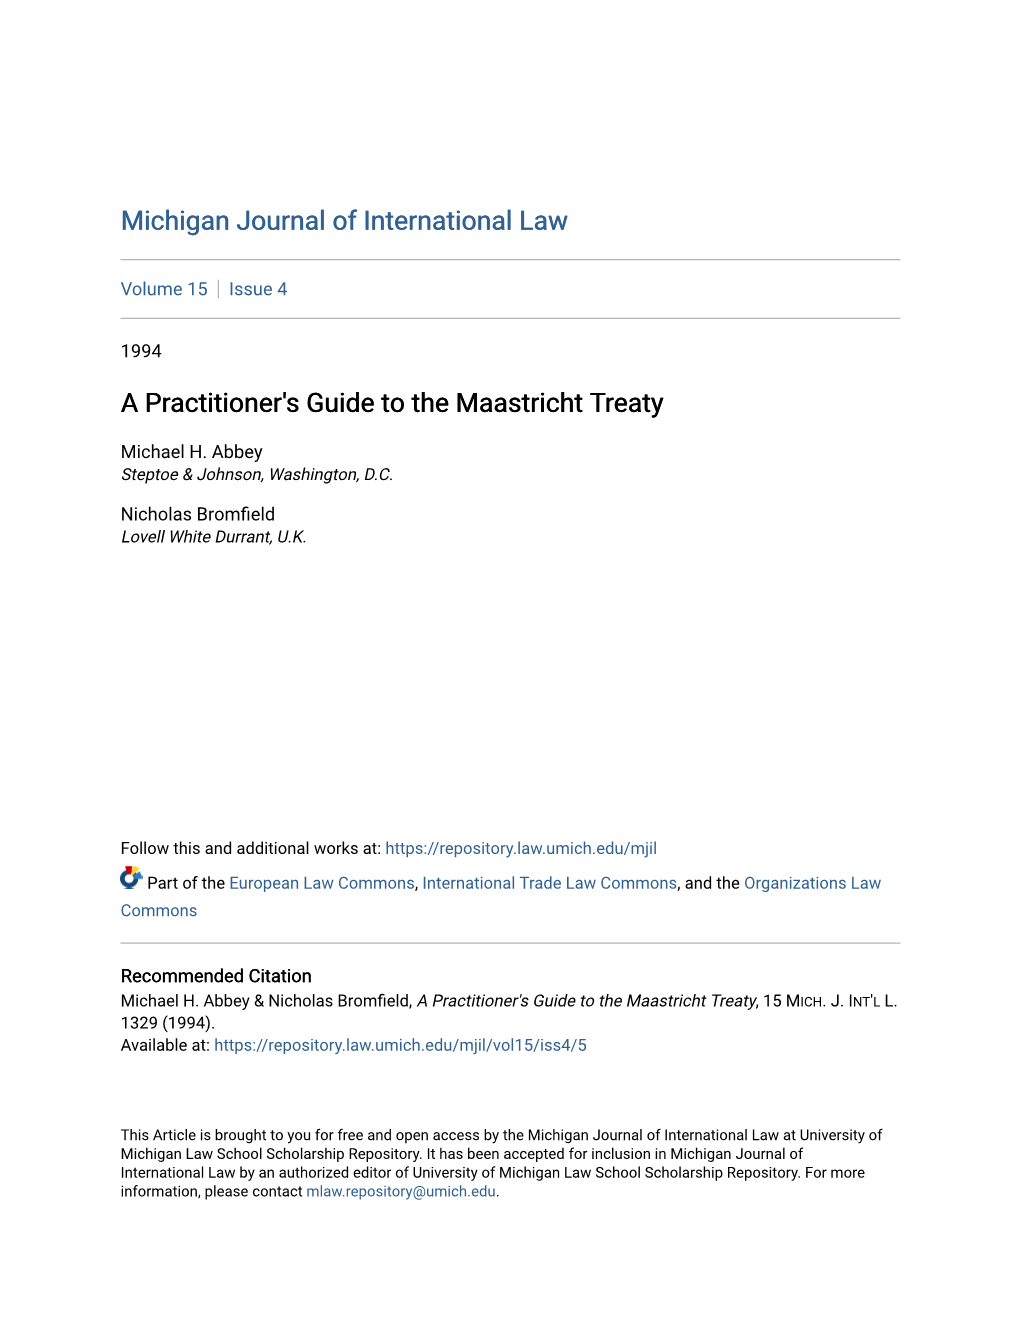 A Practitioner's Guide to the Maastricht Treaty